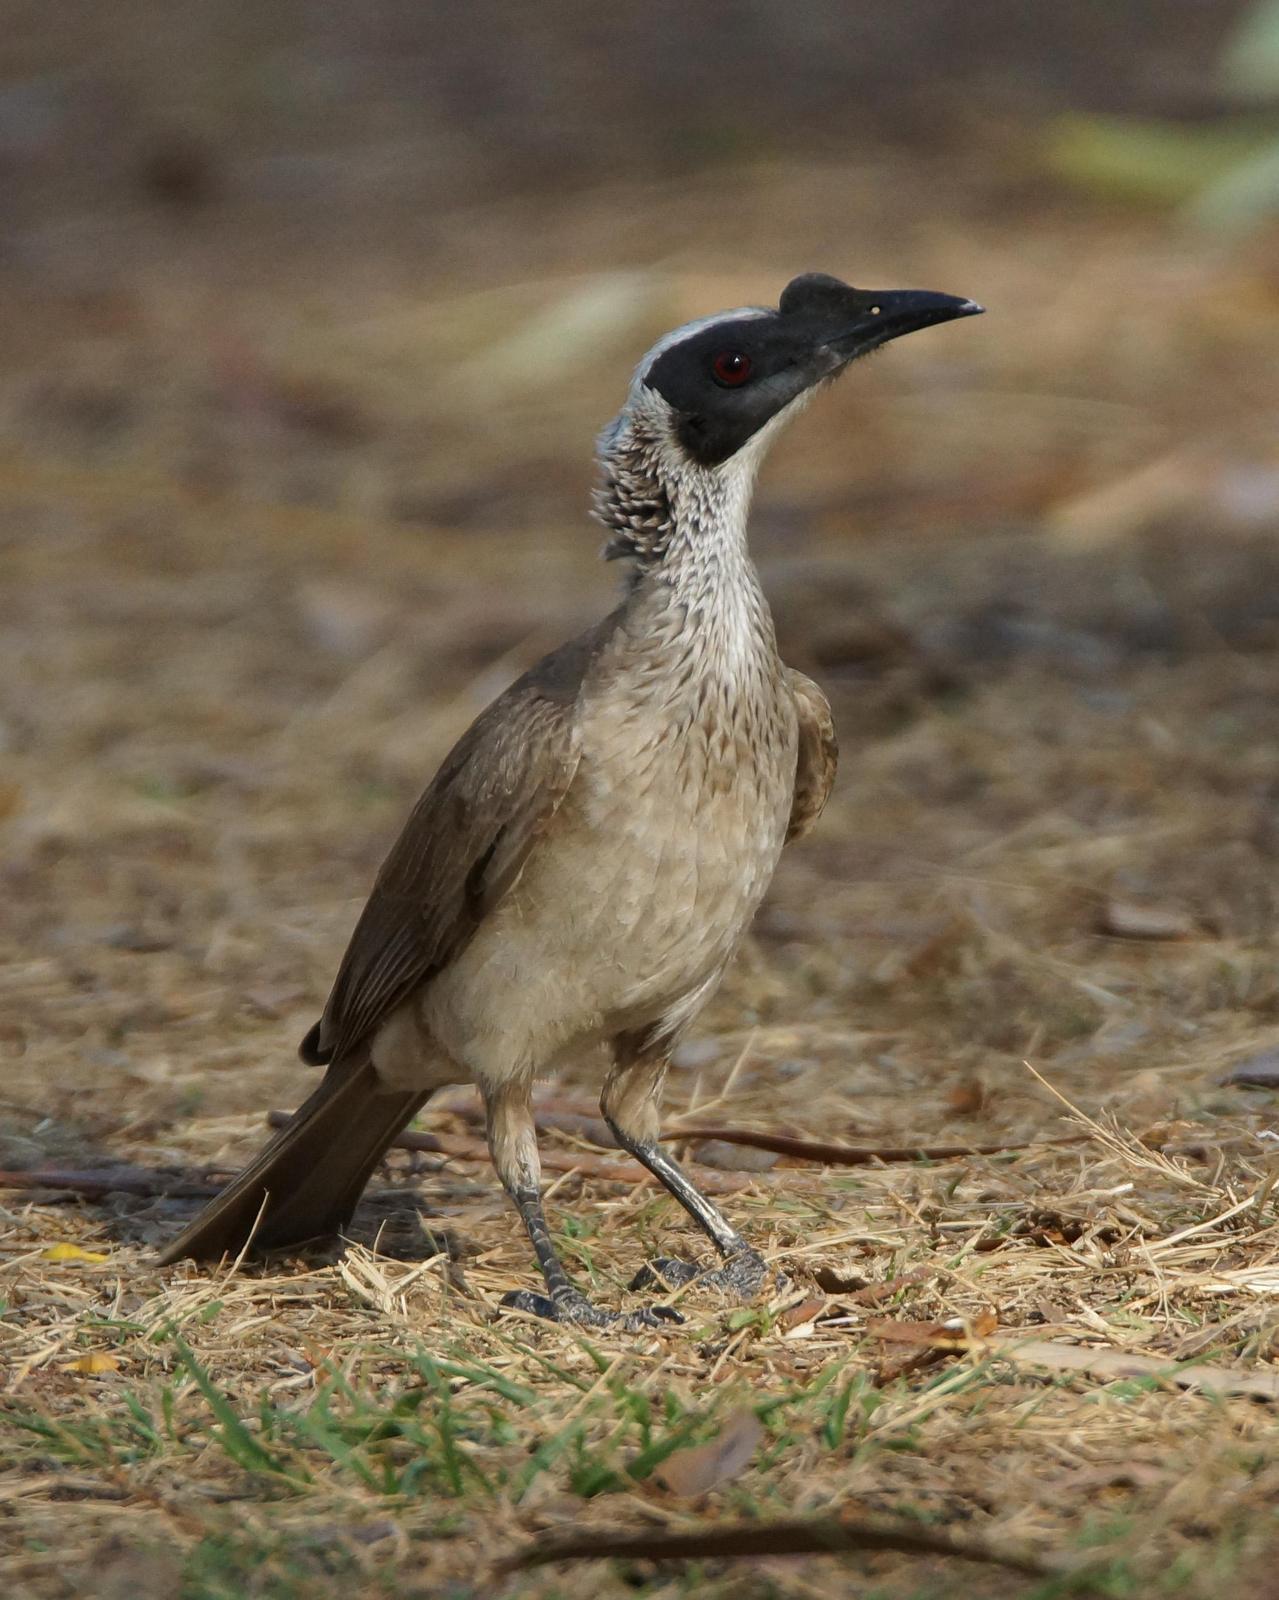 Silver-crowned Friarbird Photo by Steve Percival